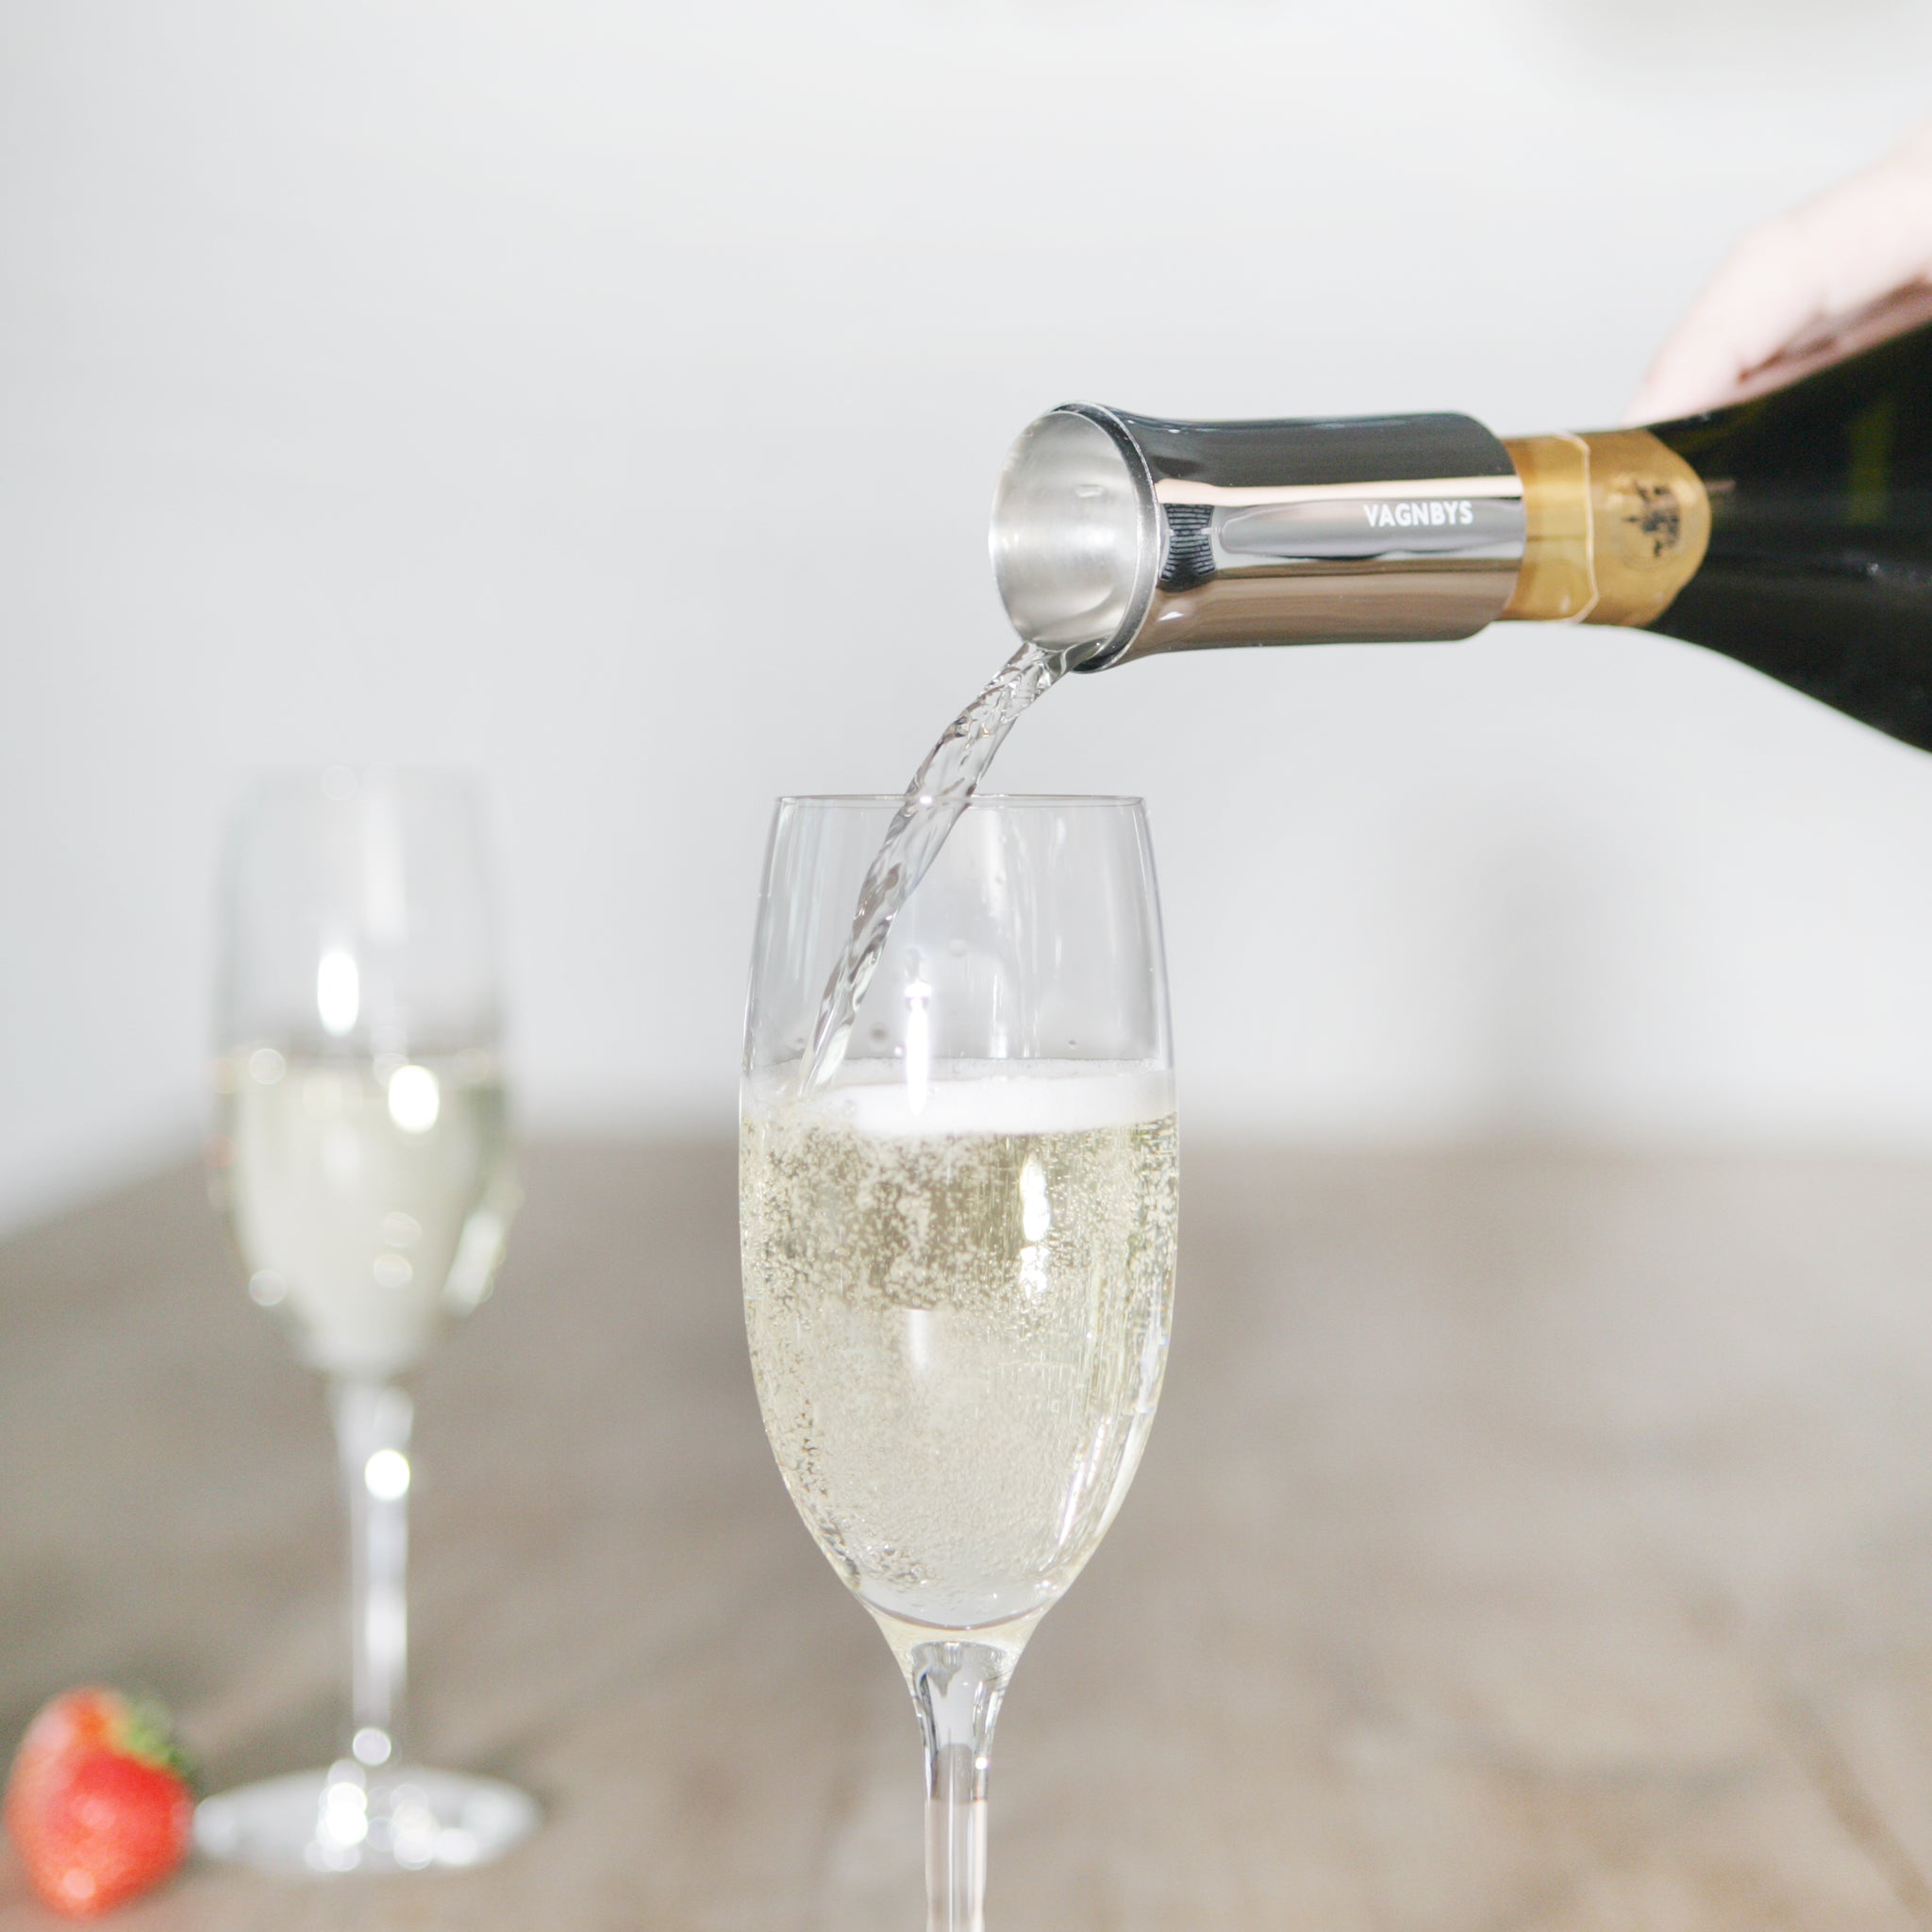  Vagnbys® Champagne Pourer by Ethan+Ashe Ethan+Ashe Perfumarie